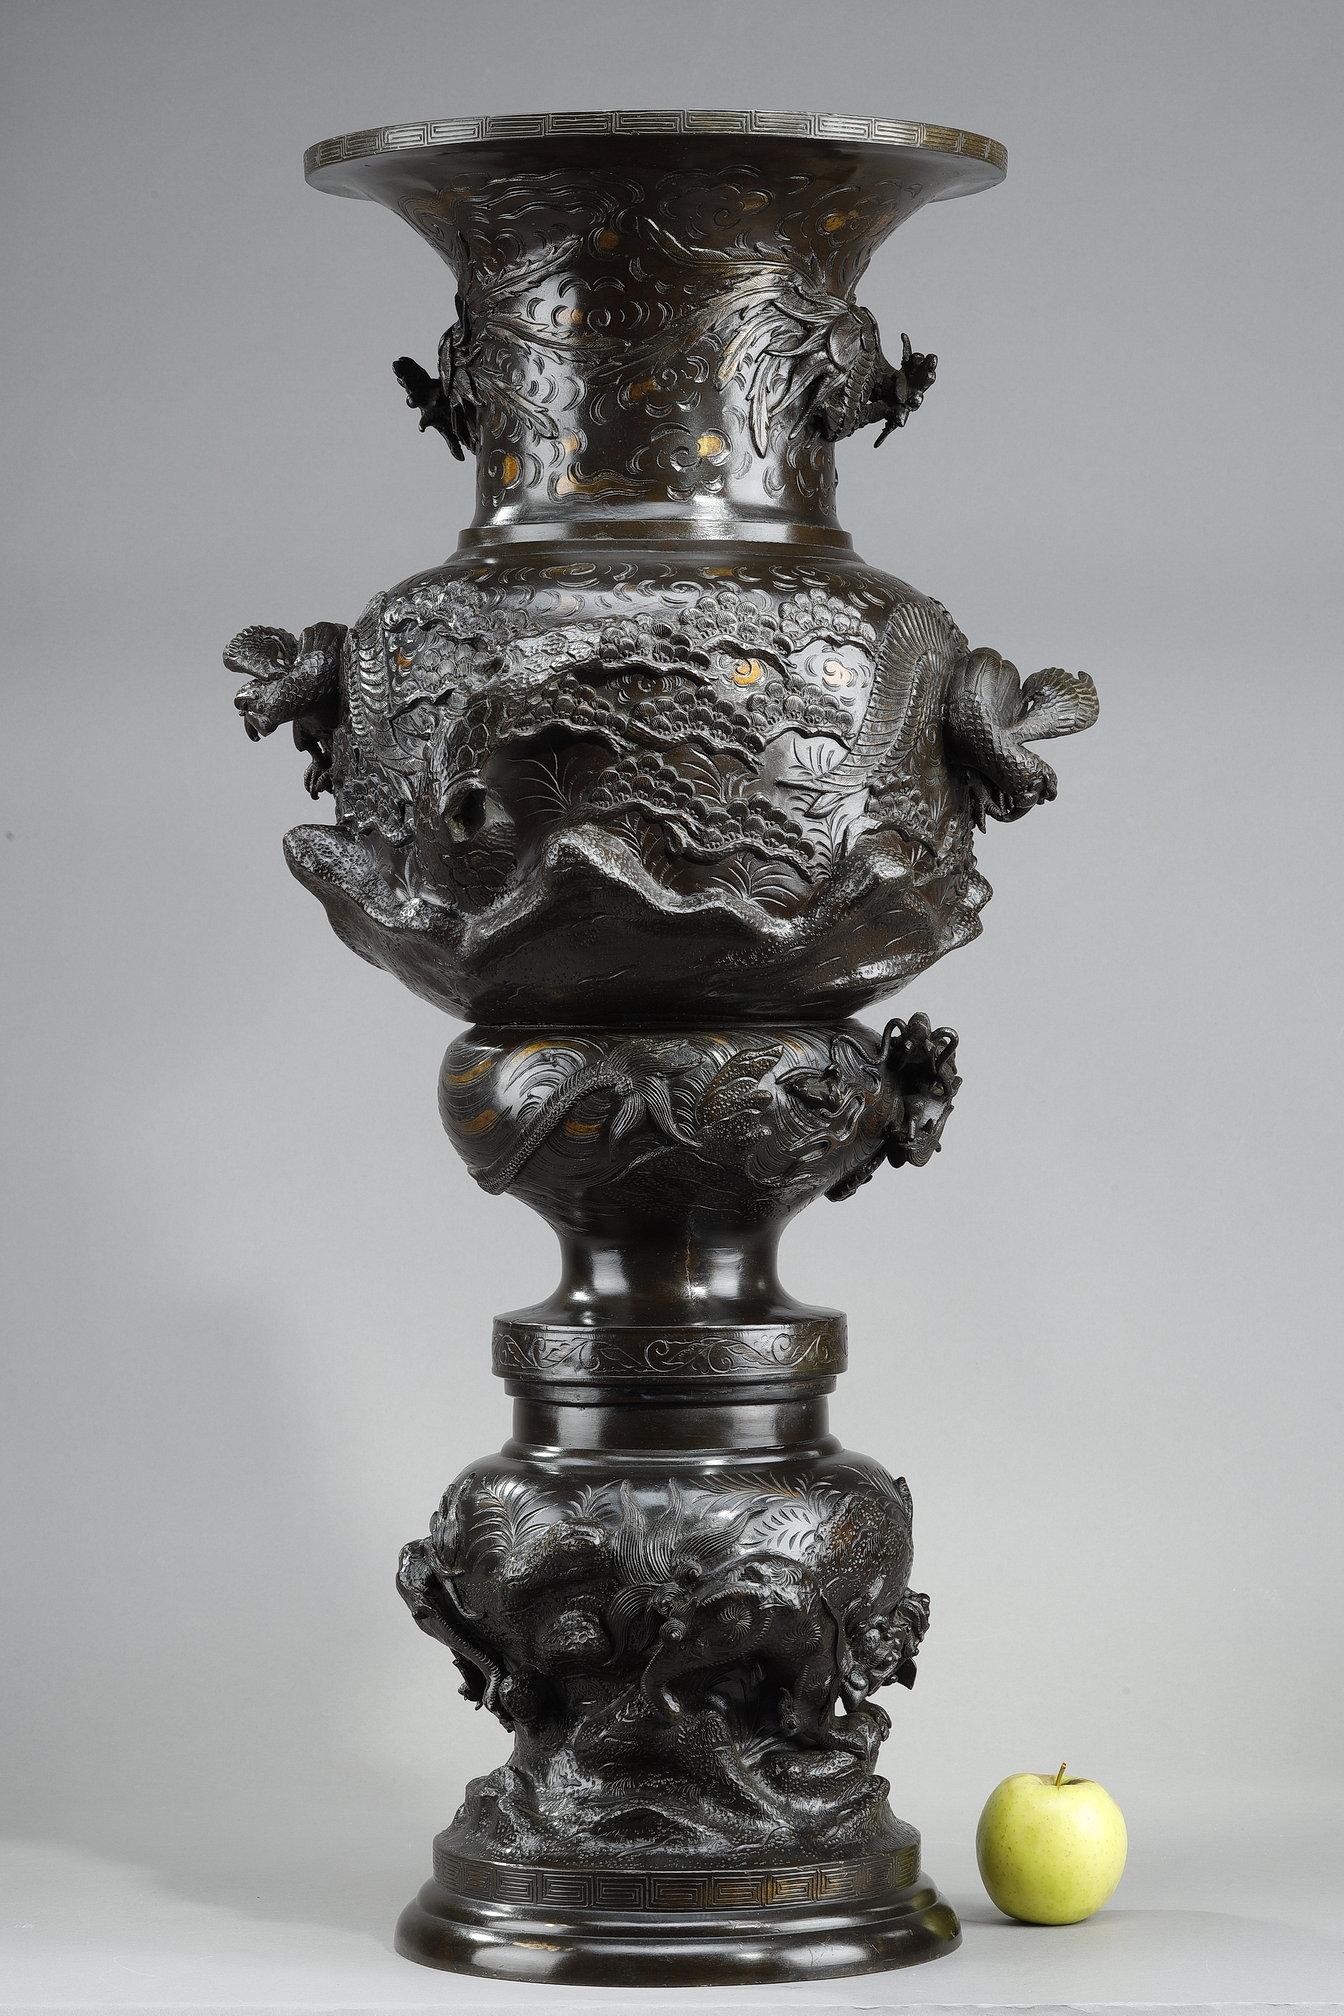 Very large sculpted bronze vase with a polyglobular body resting on a base decorated with a Greek frieze. The whole is decorated with chimeras, dragons, birds of prey and phnixes amidst a stylized décor of clouds, rocks, trees and plants. Meiji